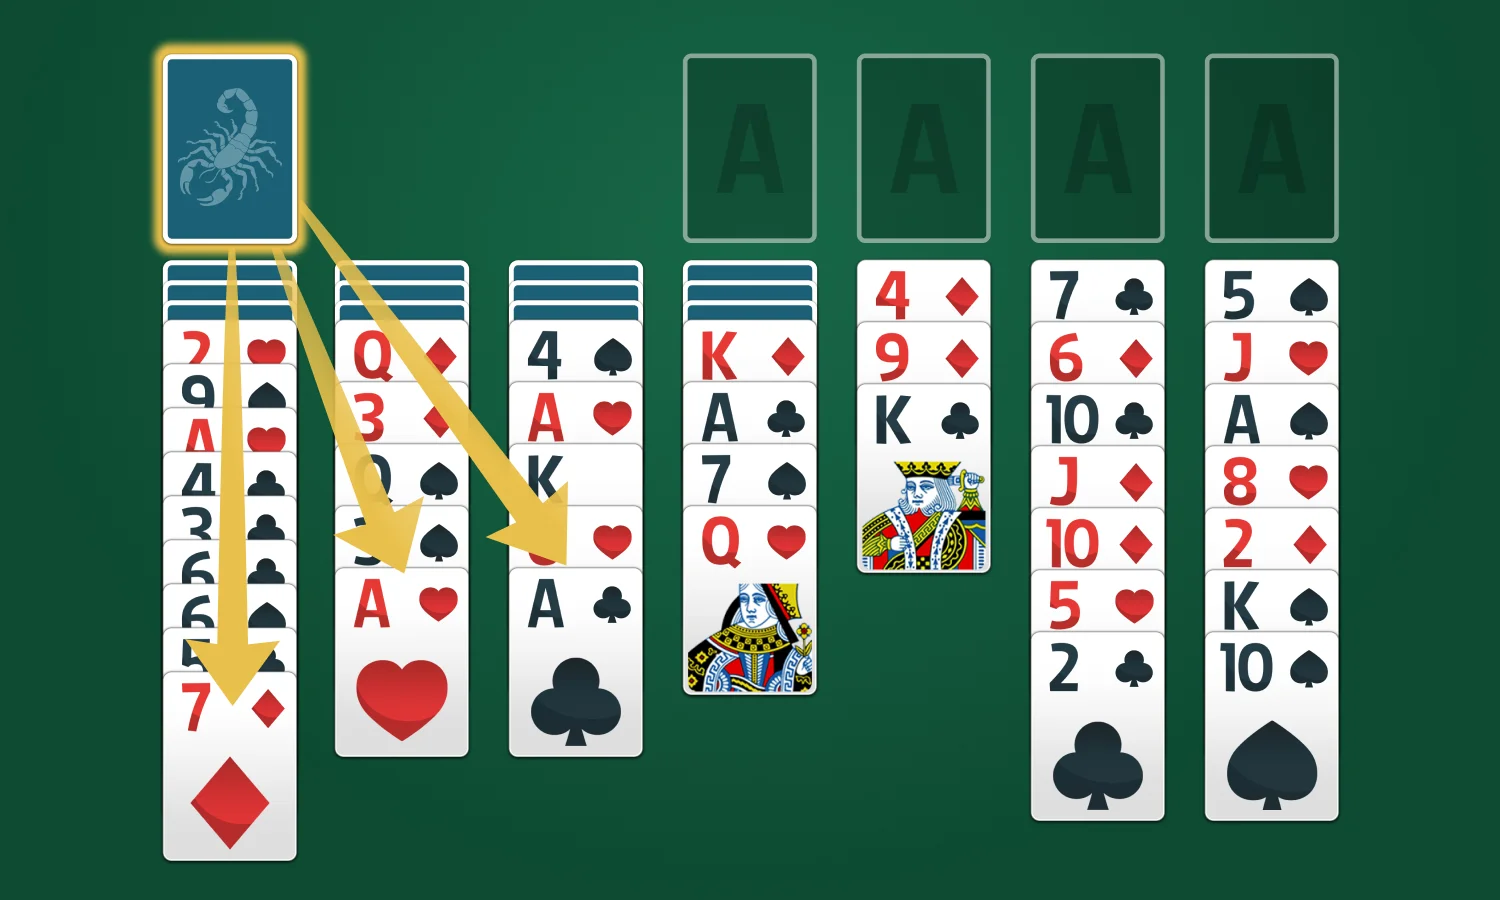 How to Play Scorpion Solitaire: Step 2